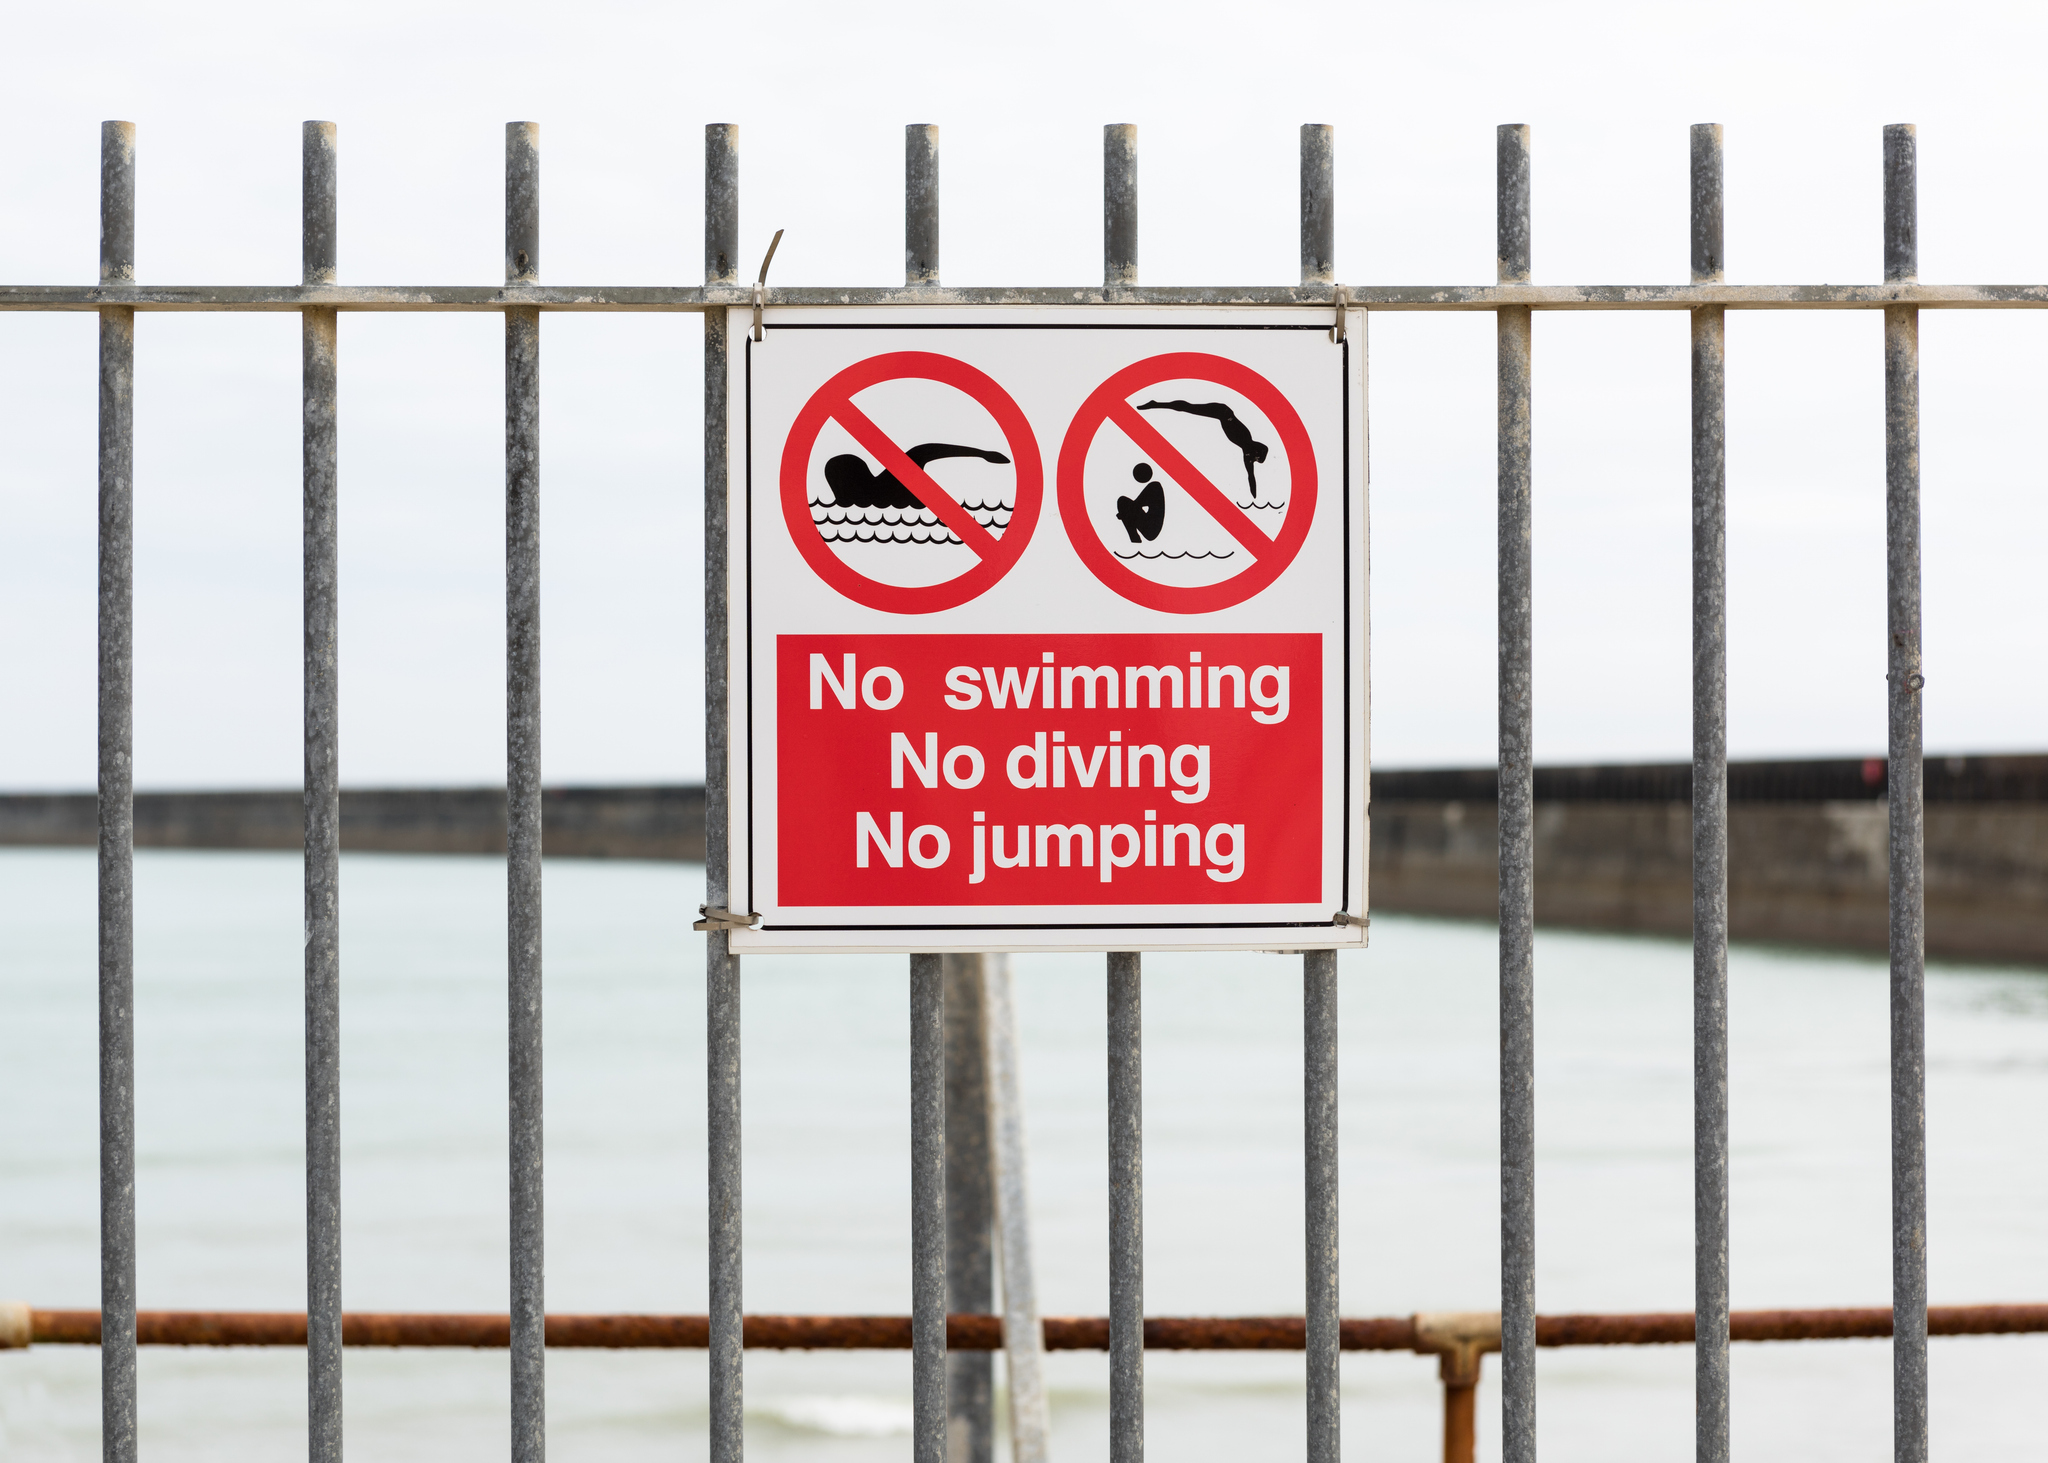 A no swimming sign in front of fenced off water